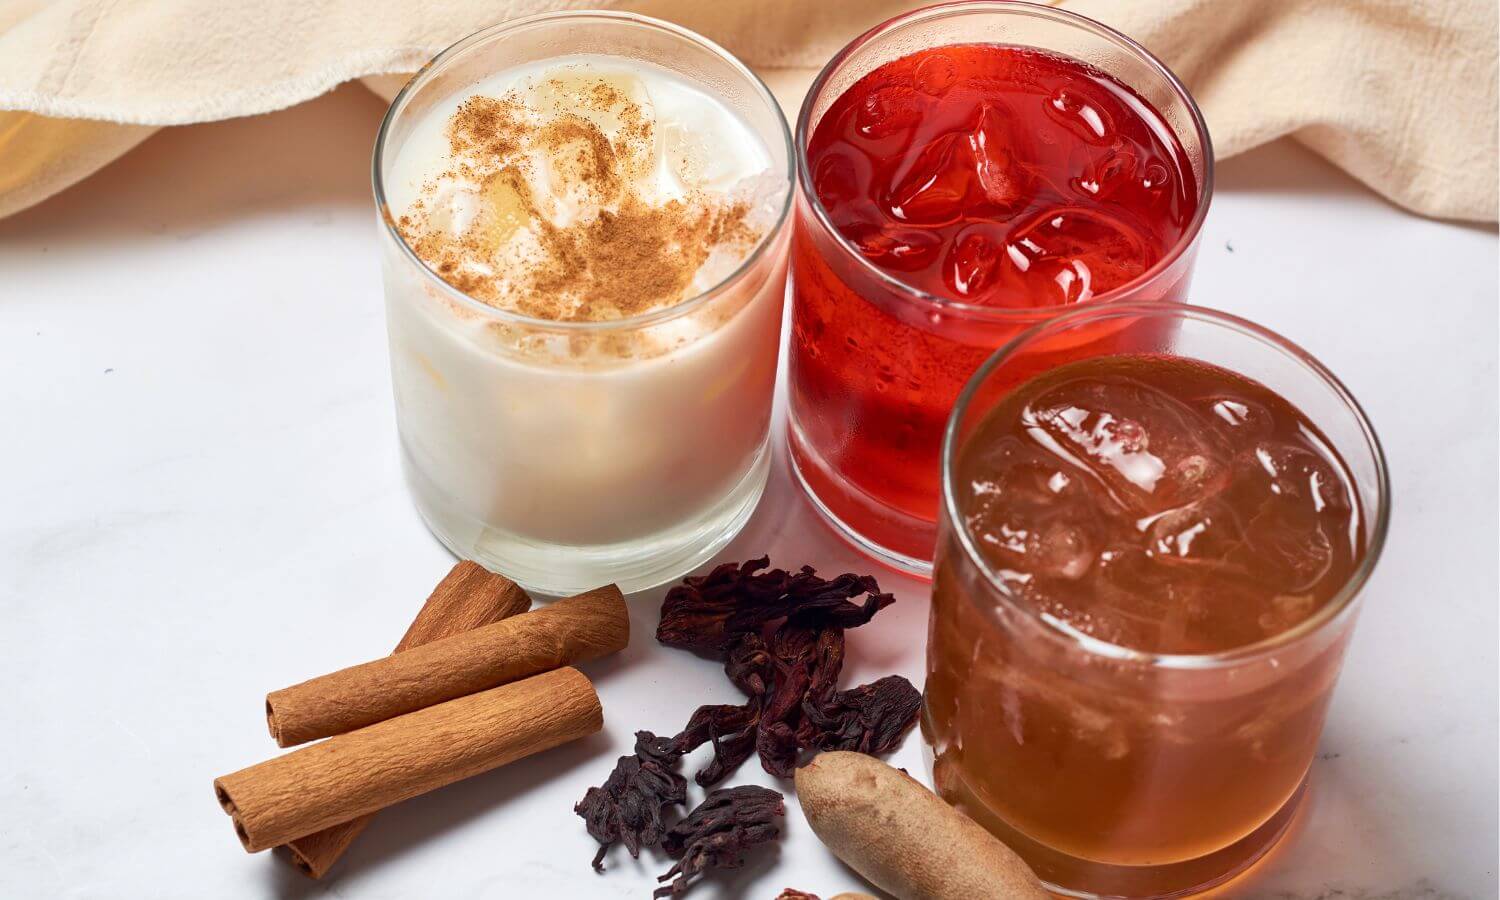 Glasses of Horchata, Tamarindo and Jamaica, classic refreshing drinks found throughout Mexico.